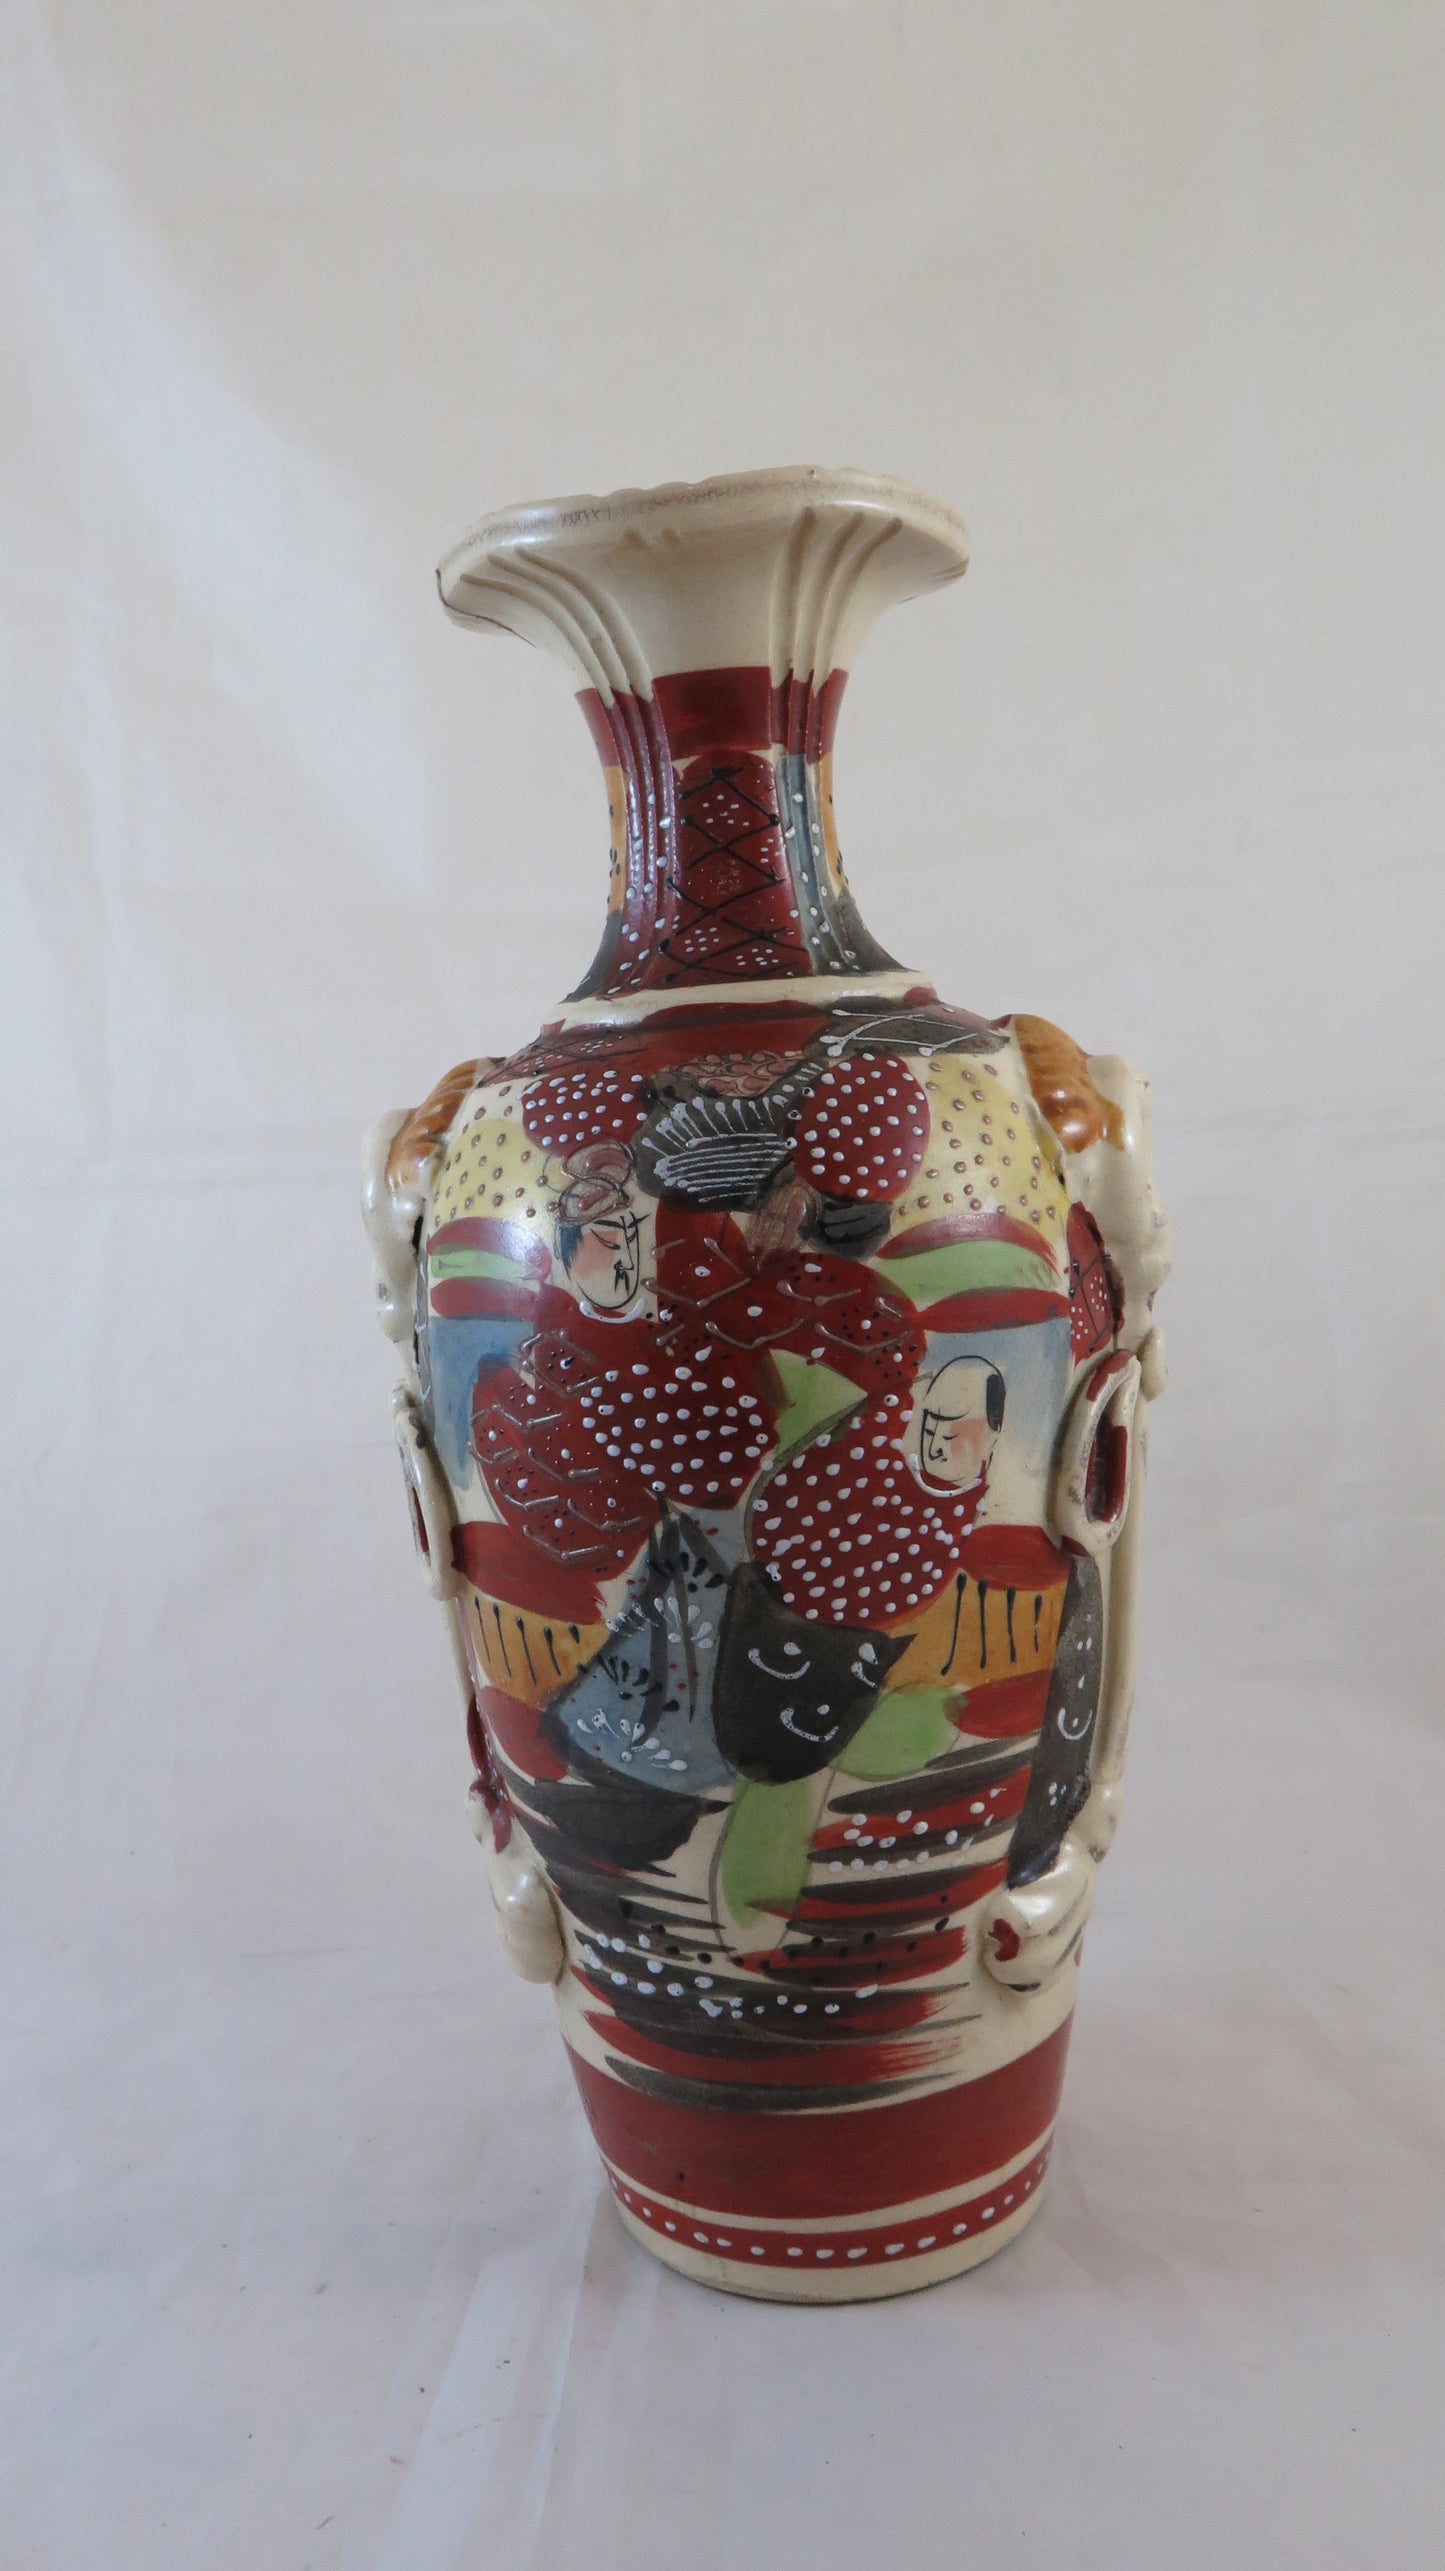 OLD JAPANESE CERAMIC VASE JAPAN SATSUMA ASIA STYLE WITH RELIEF DECORATIONS BM20